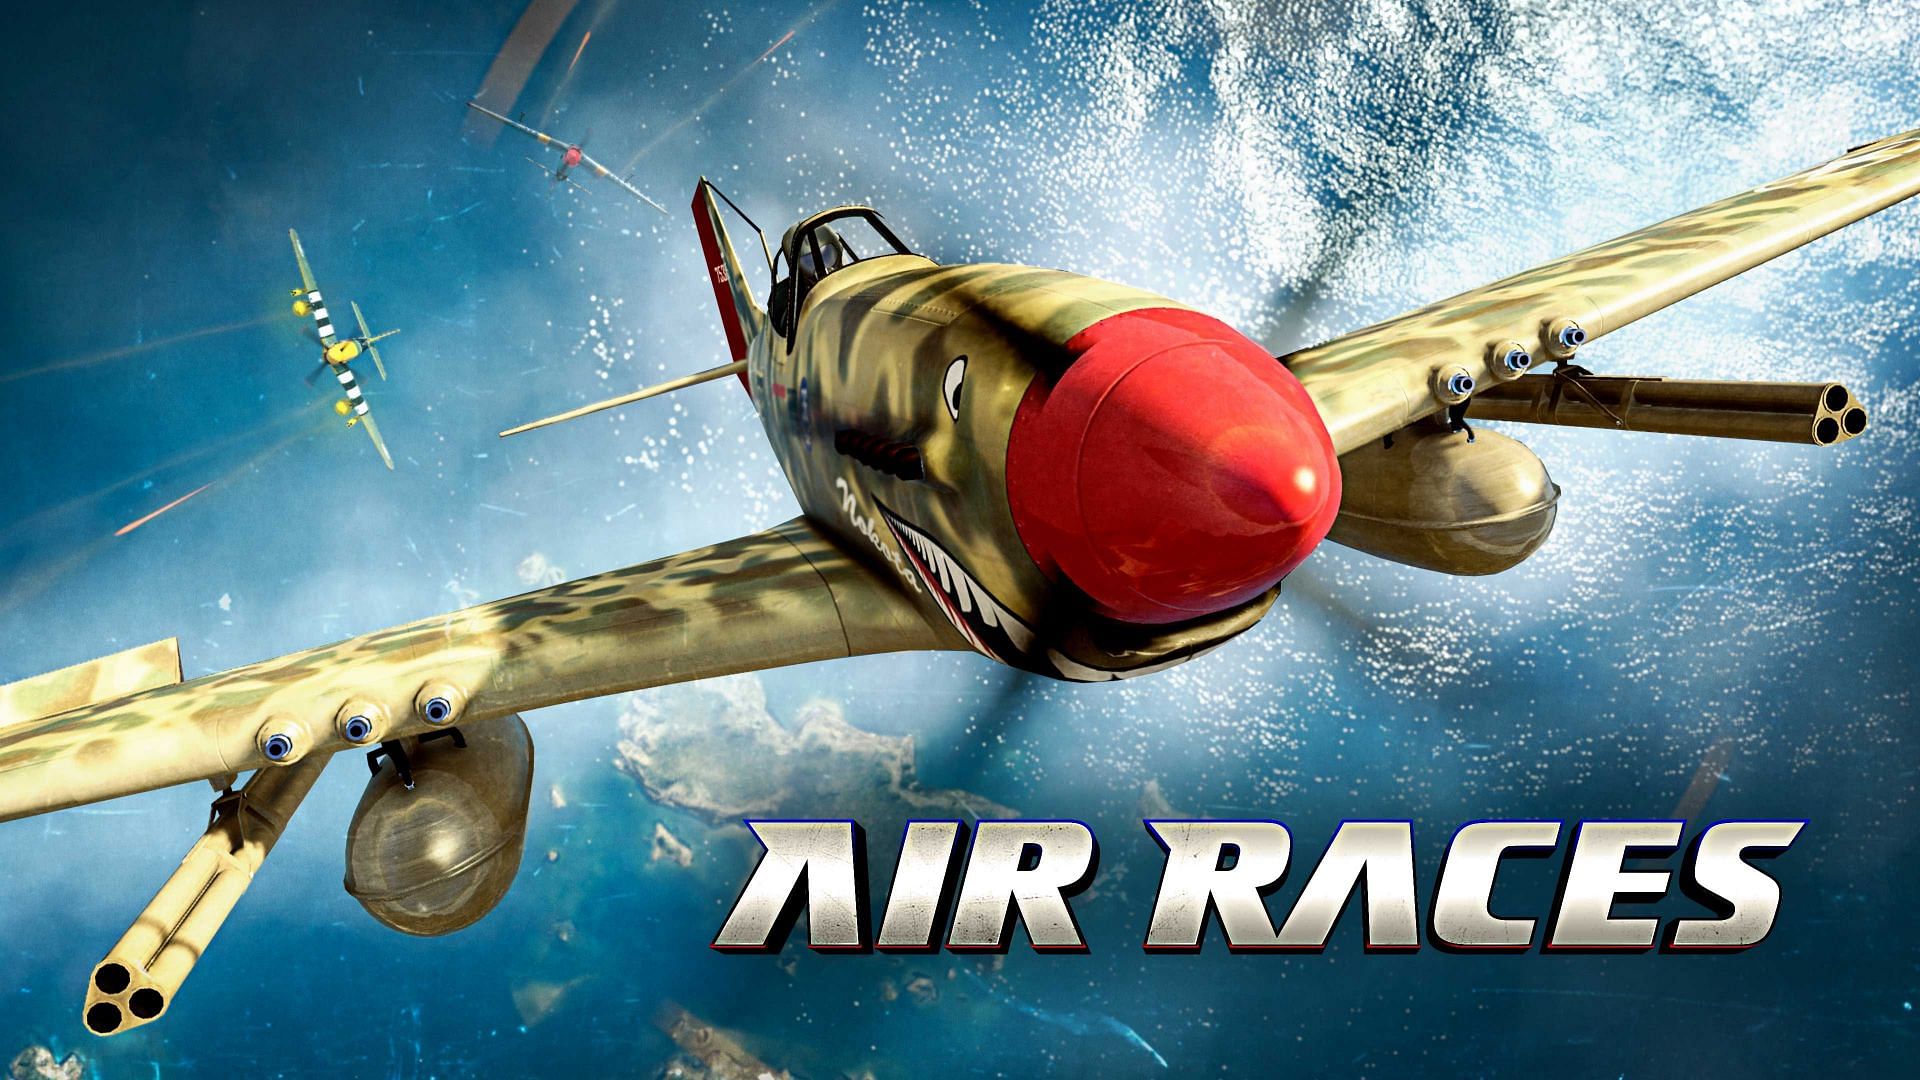 A Promotional Image involving Air Races in GTA Online